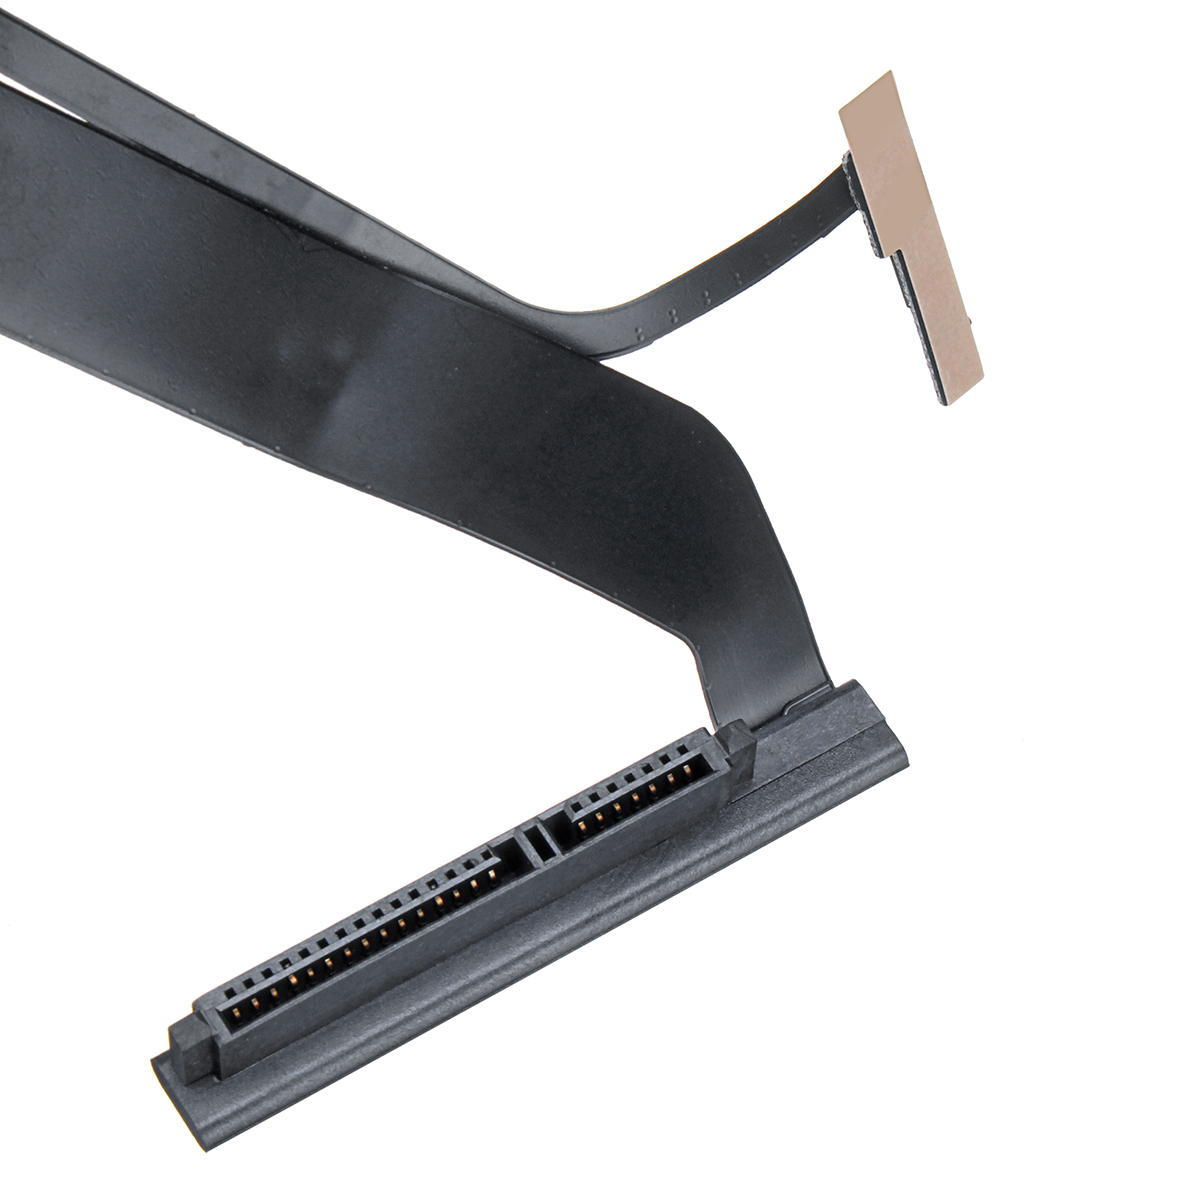 HDD-Hard-Drive-Flex-Cable-For-Apple-MacBook-Pro-13quot-A1278-821-2049-A-Mid-2012-Year-1319416-6